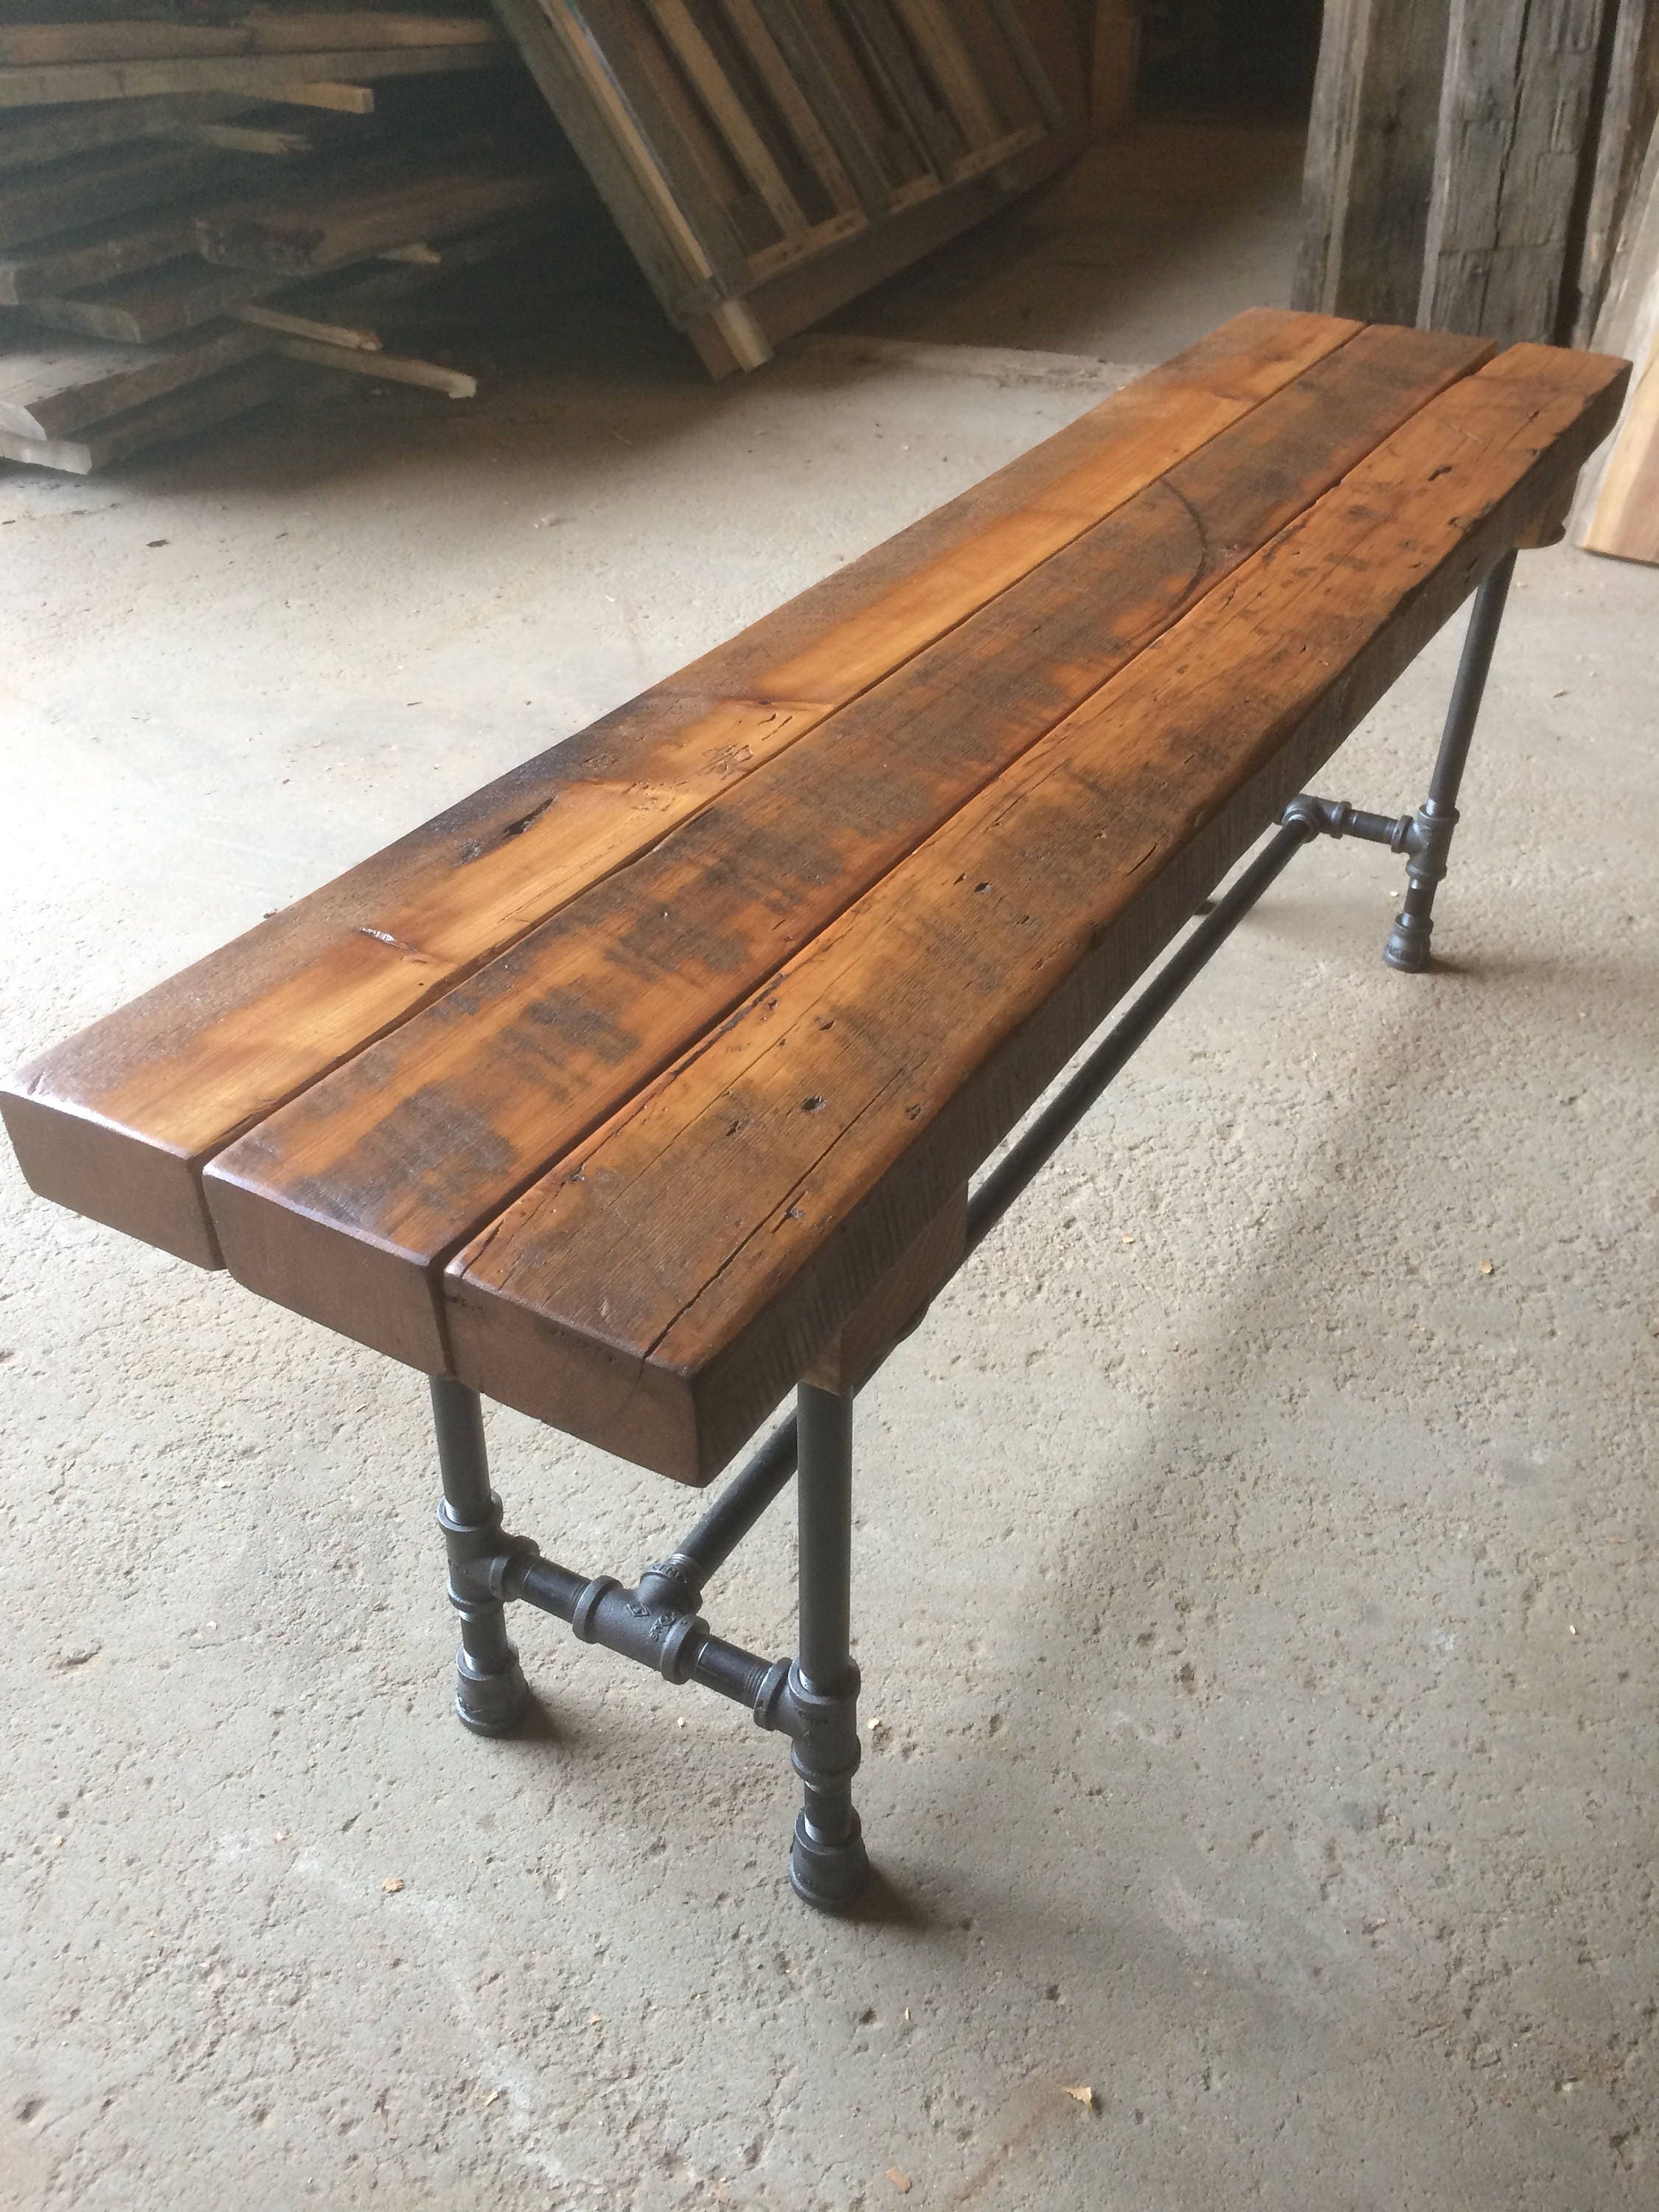 The Foundry Bench Reclaimed Wood Beam Rustic Bench Dining image